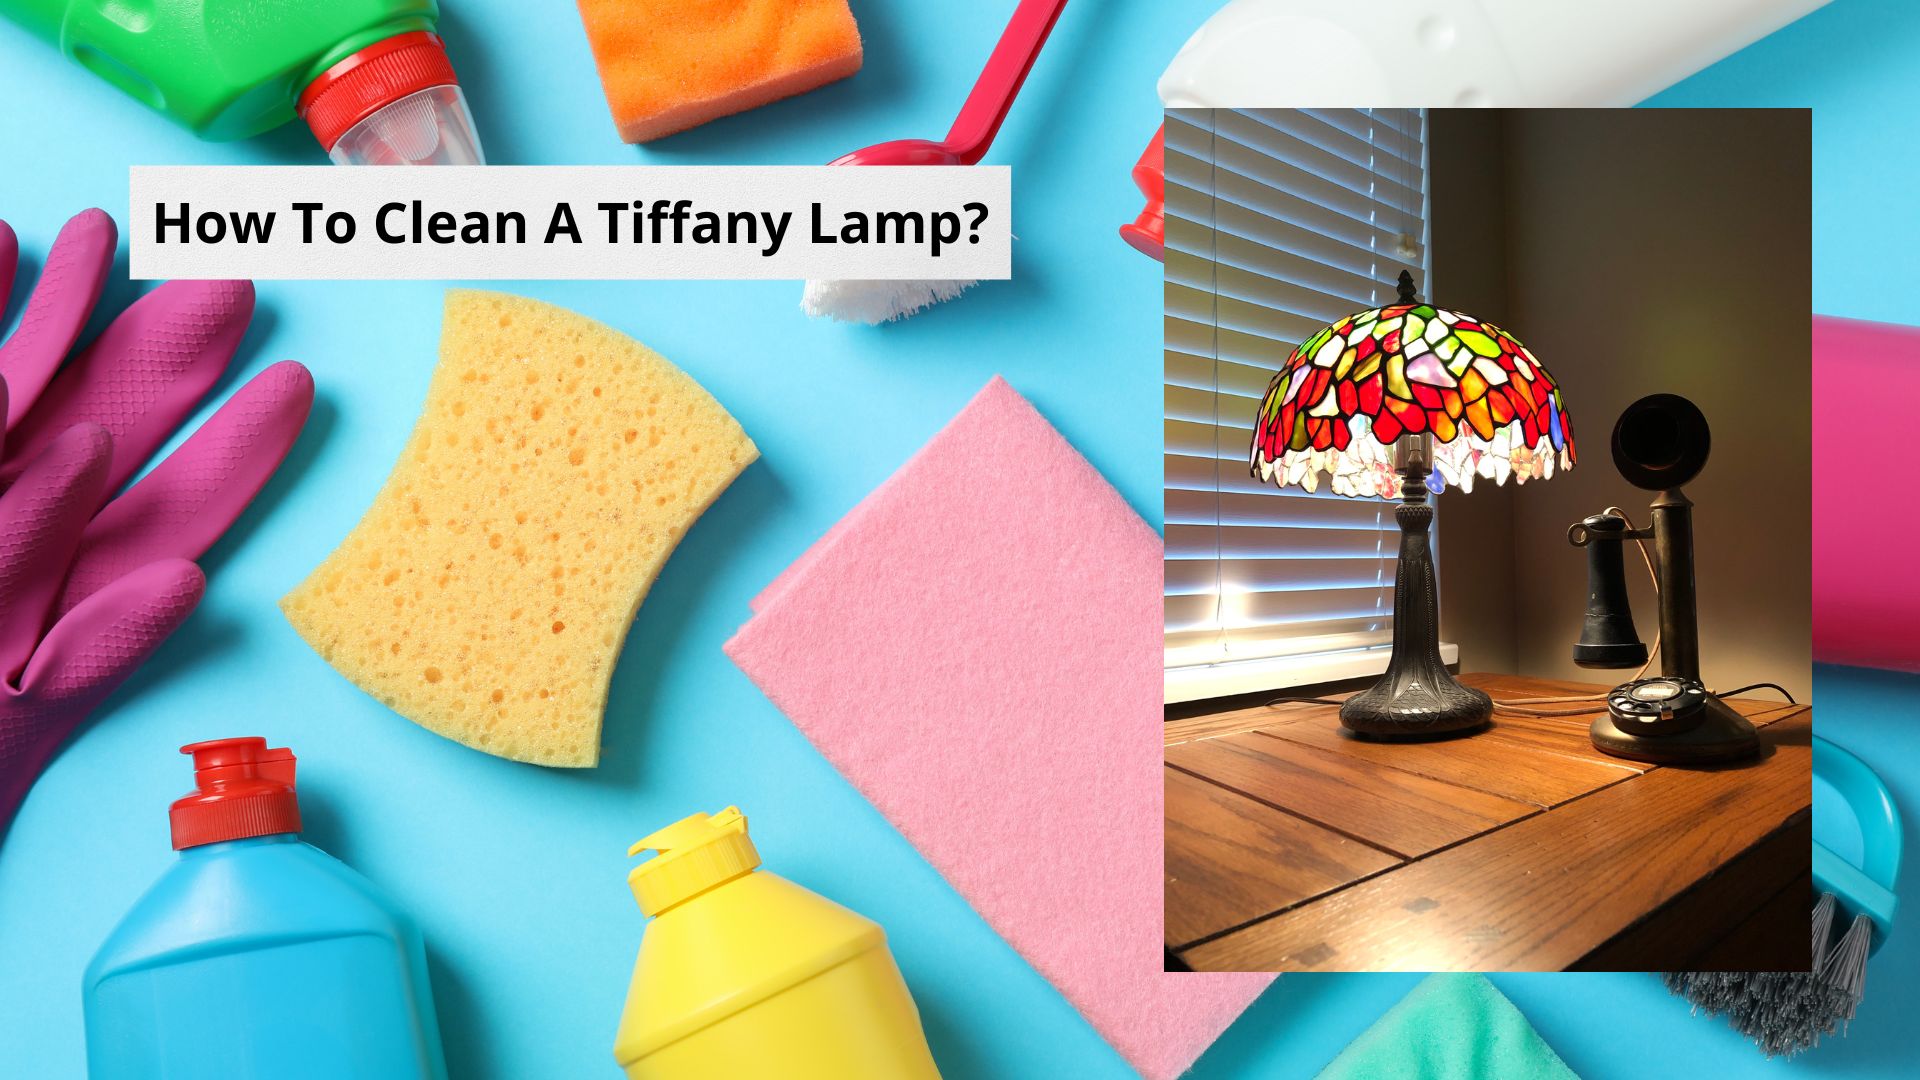 How to Clean Tiffany Lamps: A Clear and Confident Guide